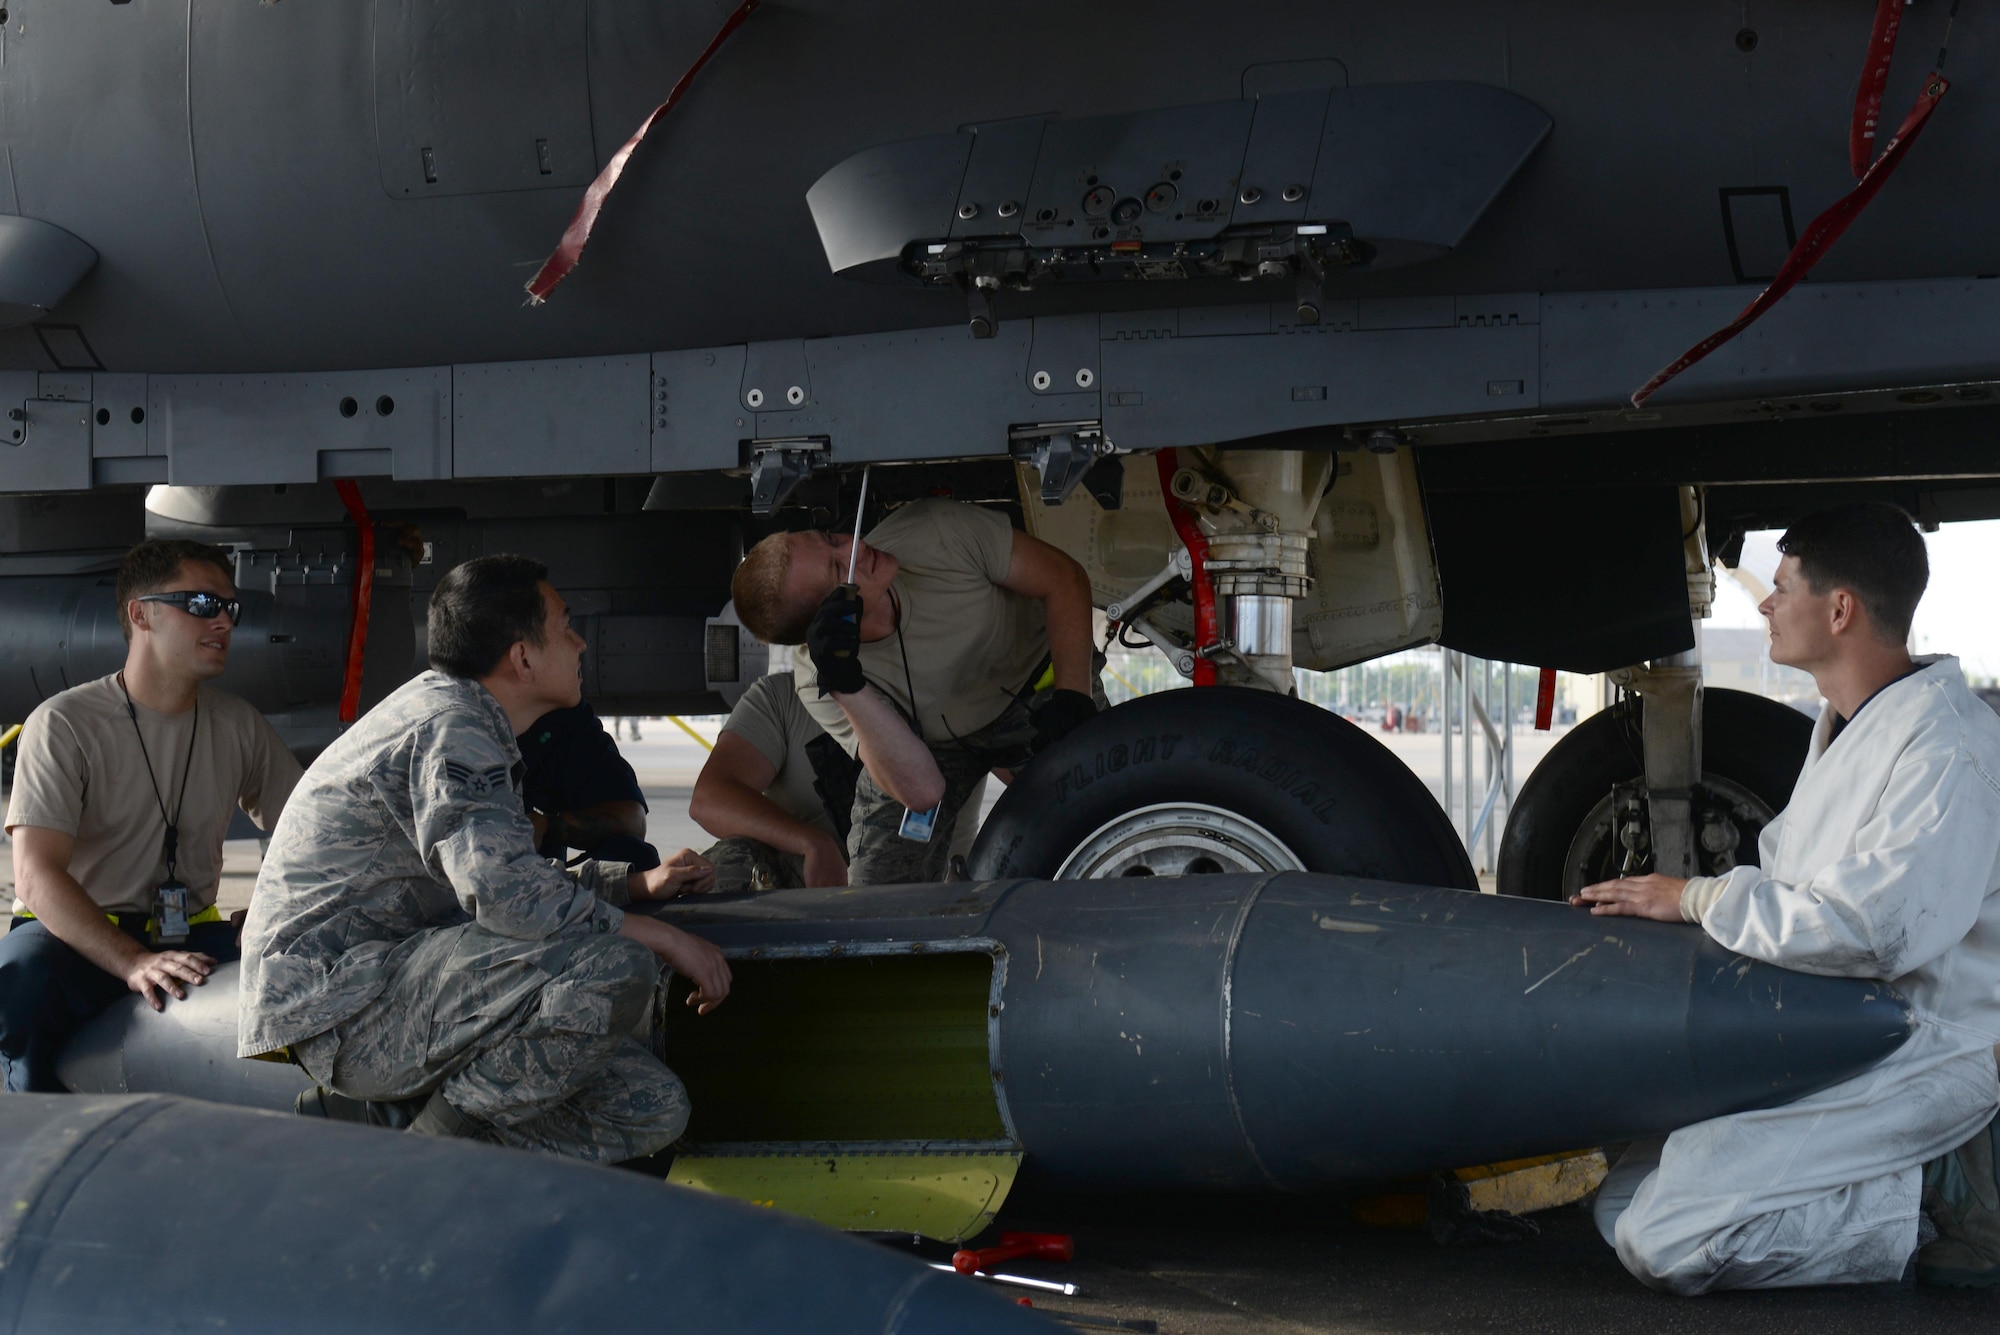 Airmen from the 4th Aircraft Maintenance Squadron inspect an F-15E Strike Eagle, April 27, 2016, at Seymour Johnson Air Force Base, North Carolina. Inspections were performed on the aircrafts to prepare for Exercise Combat Hammer. Portions of this image were masked for operational security reasons. (U.S. Air Force photo by Airman 1st Class Ashley Williamson/Released) 